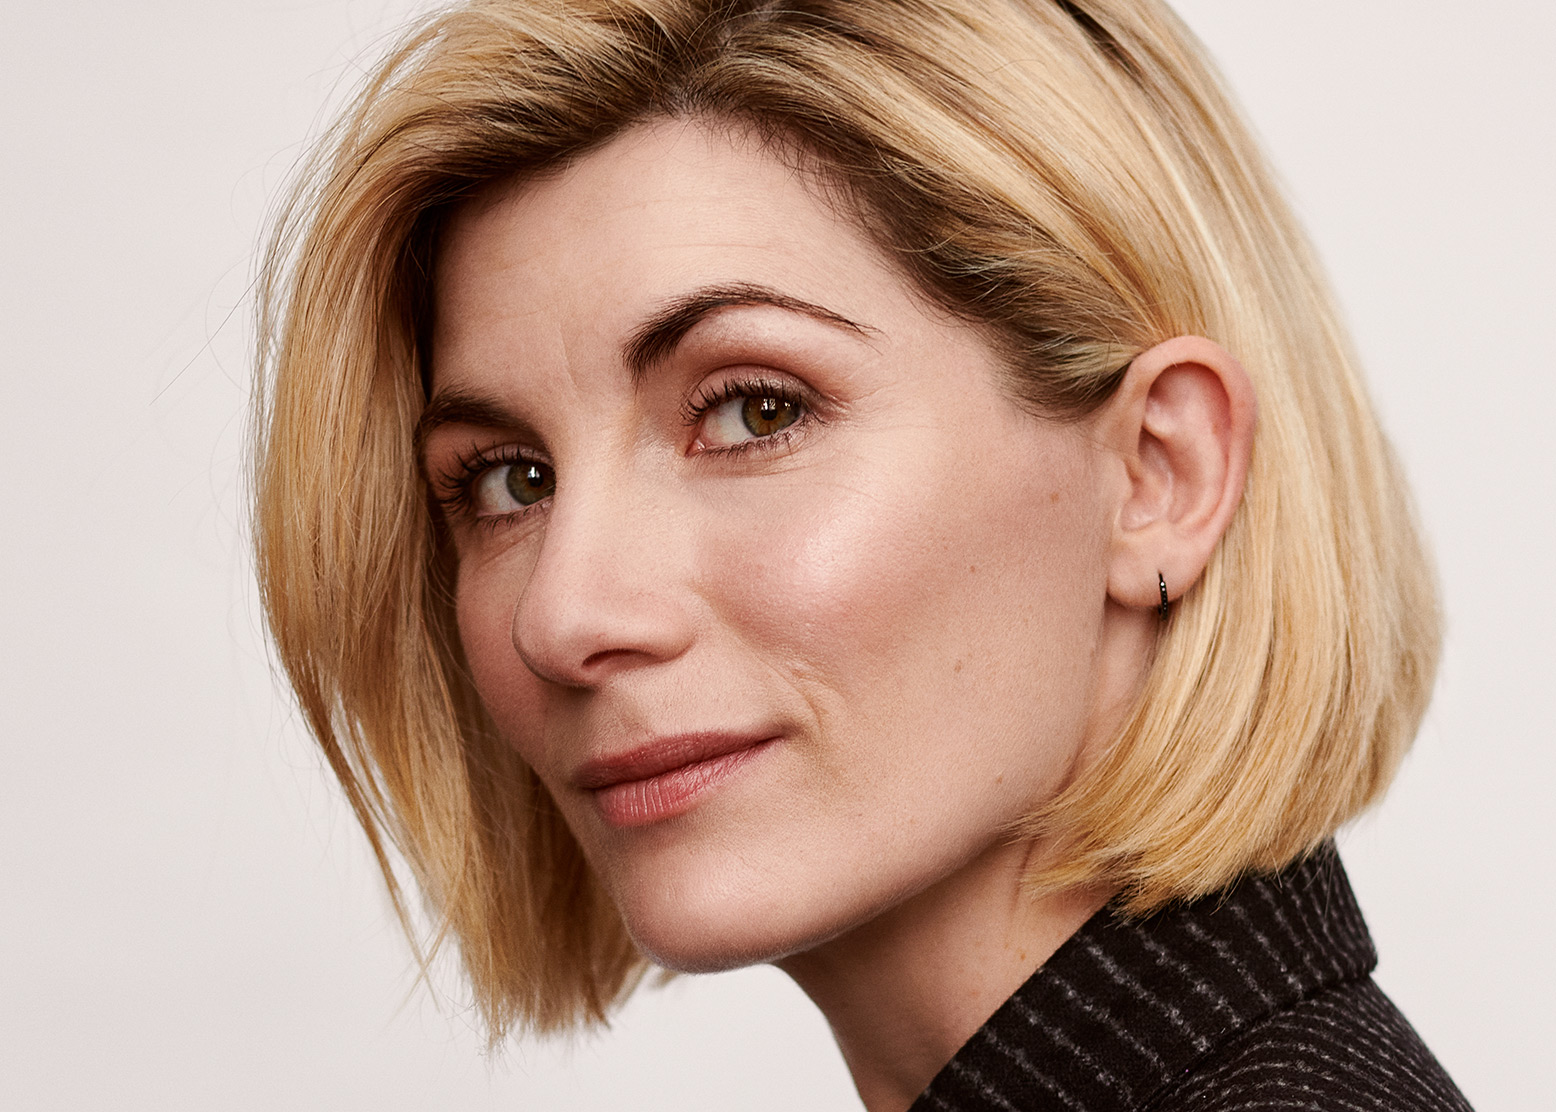 Jodie-Whittaker-for-The-Female-Lead-by-Sane-Seven-thumb